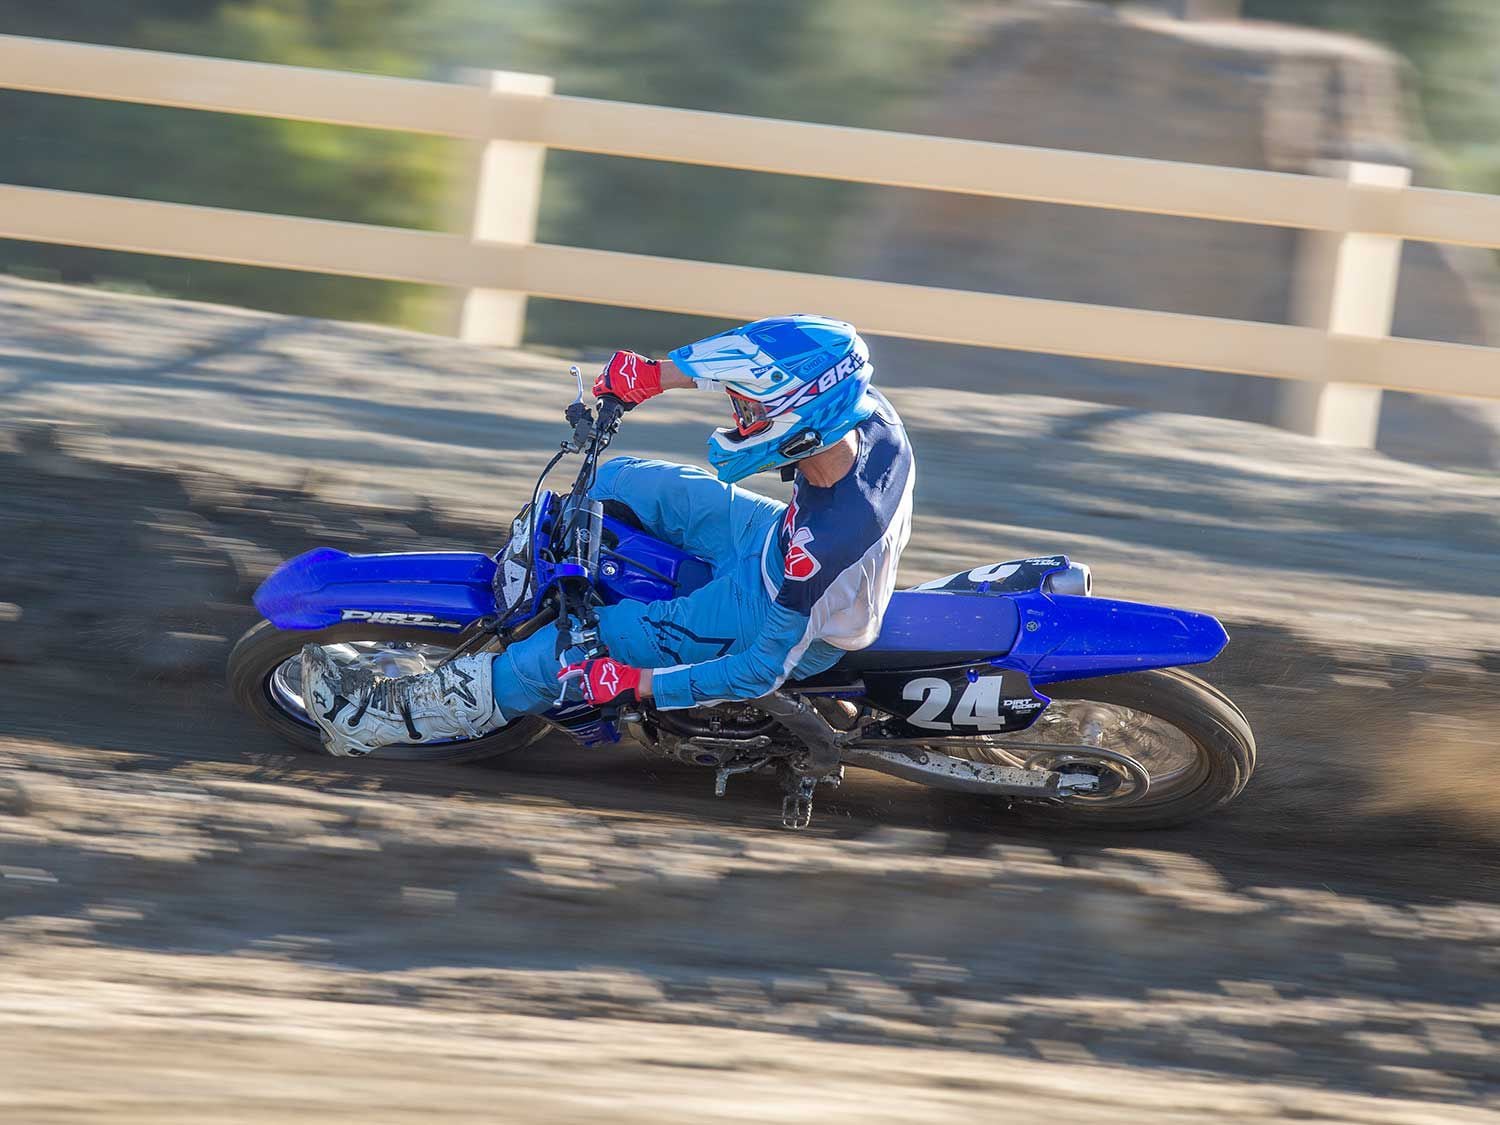 “Yamaha might have the most balanced engine package of all. Its power delivery is slightly harsher off the bottom in my opinion, but that’s not necessarily a bad thing as it allows you to get up to speed out of a slow corner or hit a jump out of a tight line. The only downside is that it’s still loud!” <em>—Michael Gilbert</em>